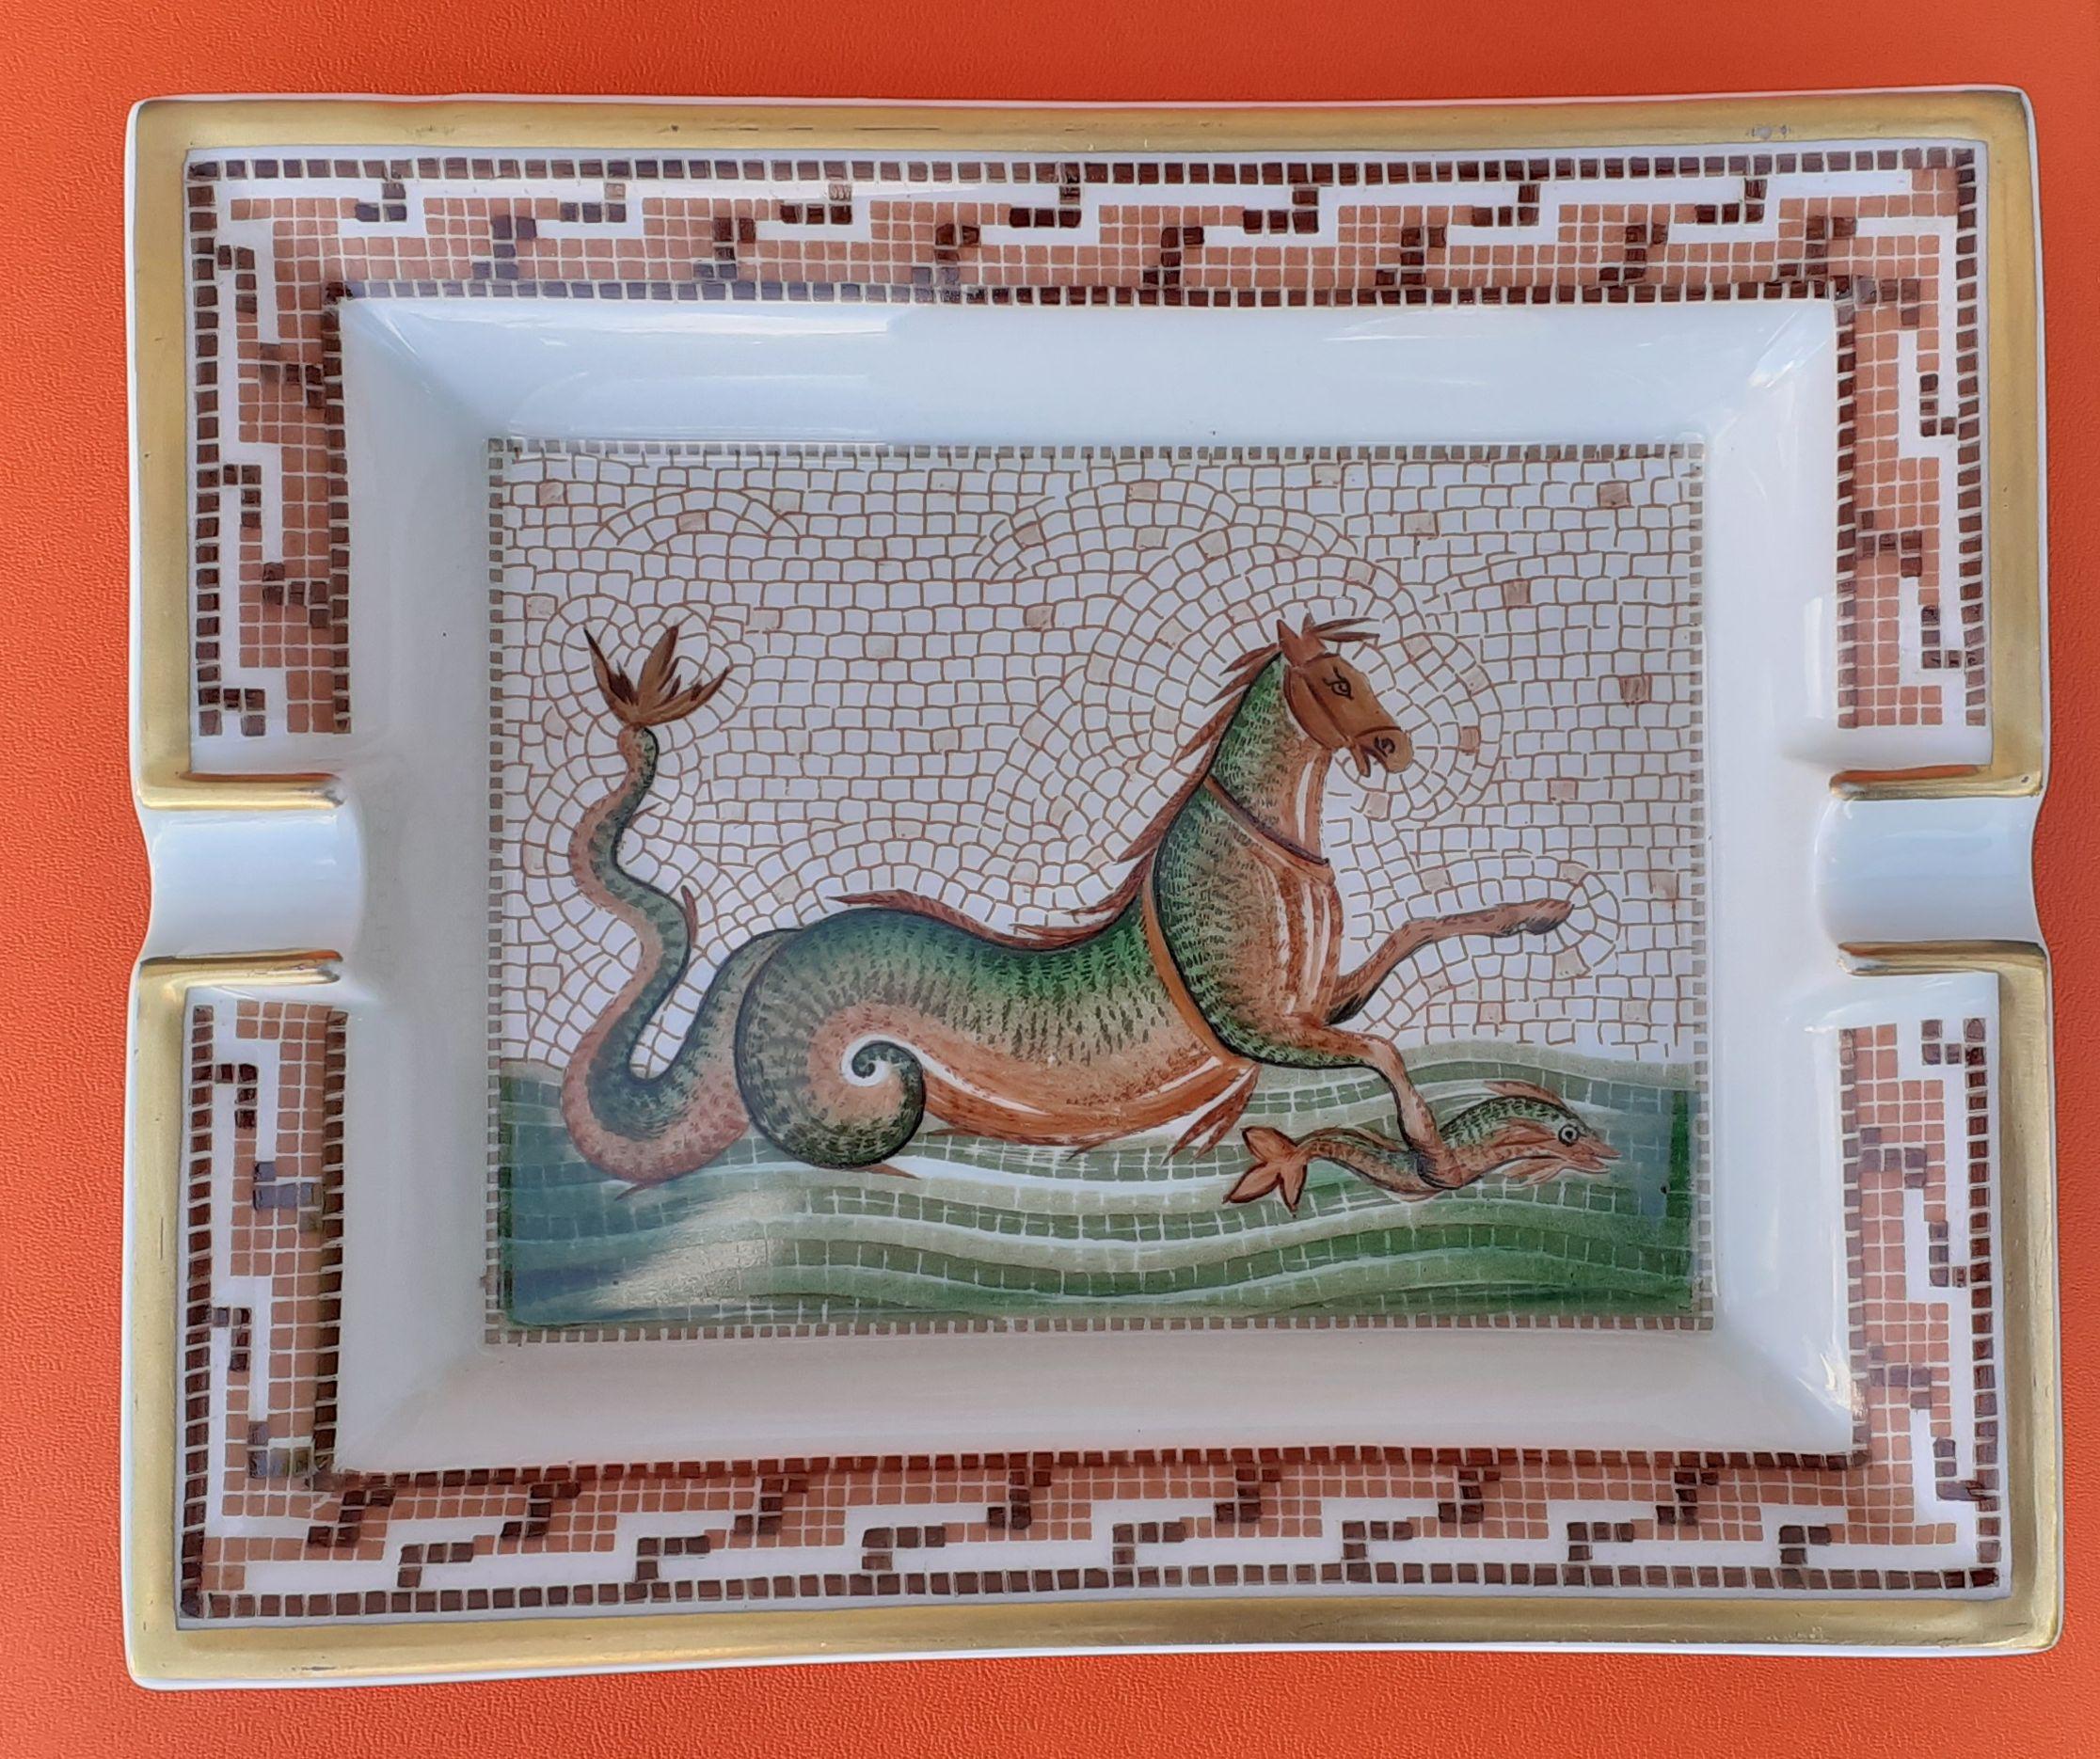 Beautiful and Rare Authentic Hermès Ashtray

Pattern: Seahorse

This creature is from the greek mythology. It has a horse front, and a fish or snake rear part

Made in France

Made of Porcelain with golden edges

Colorways: White, Brown, Green,